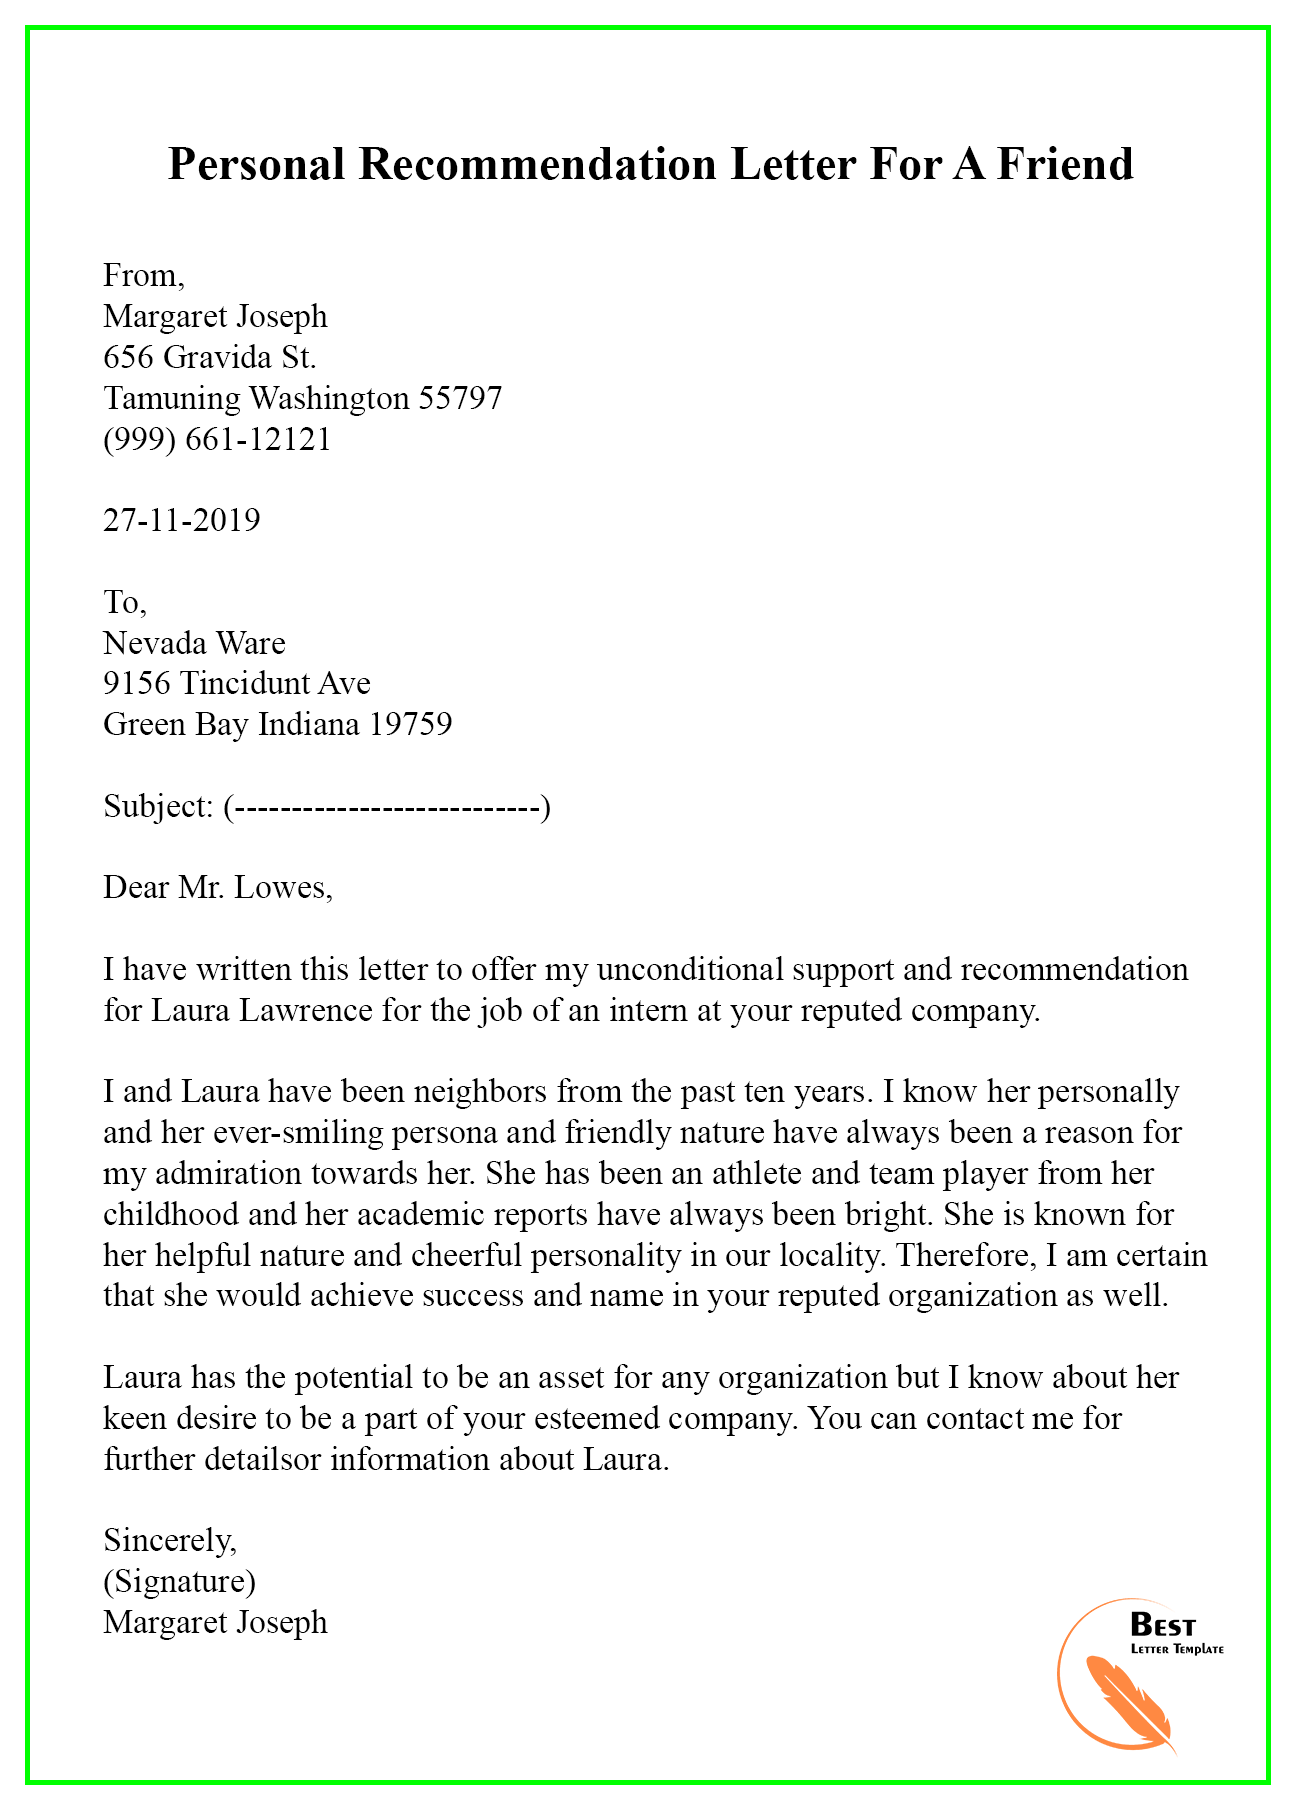 Immigration Letter Of Recommendation For A Friend from bestlettertemplate.com